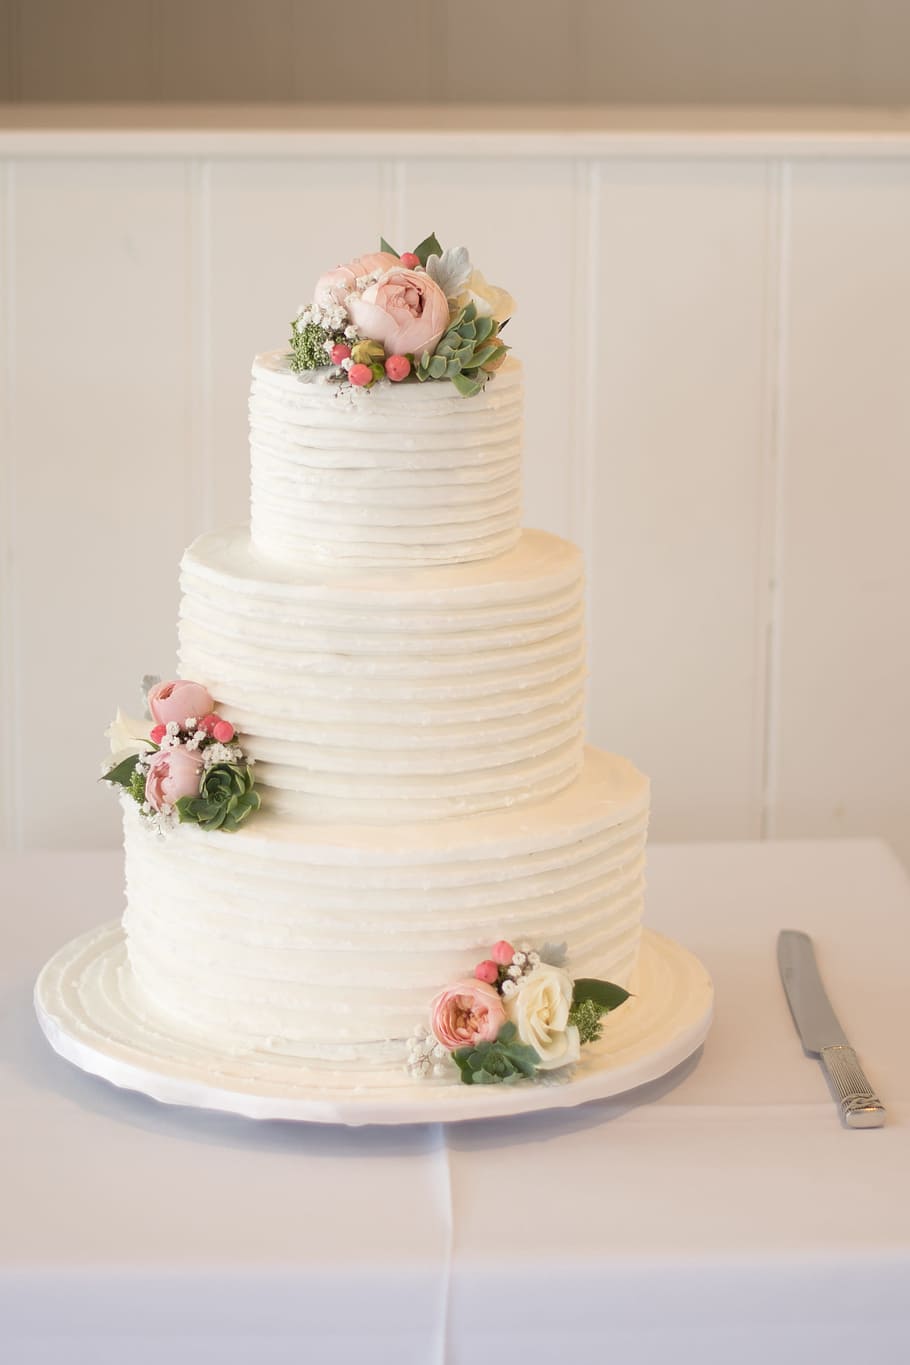 Stunning 4K Collection of Over 999 Wedding Cake Images